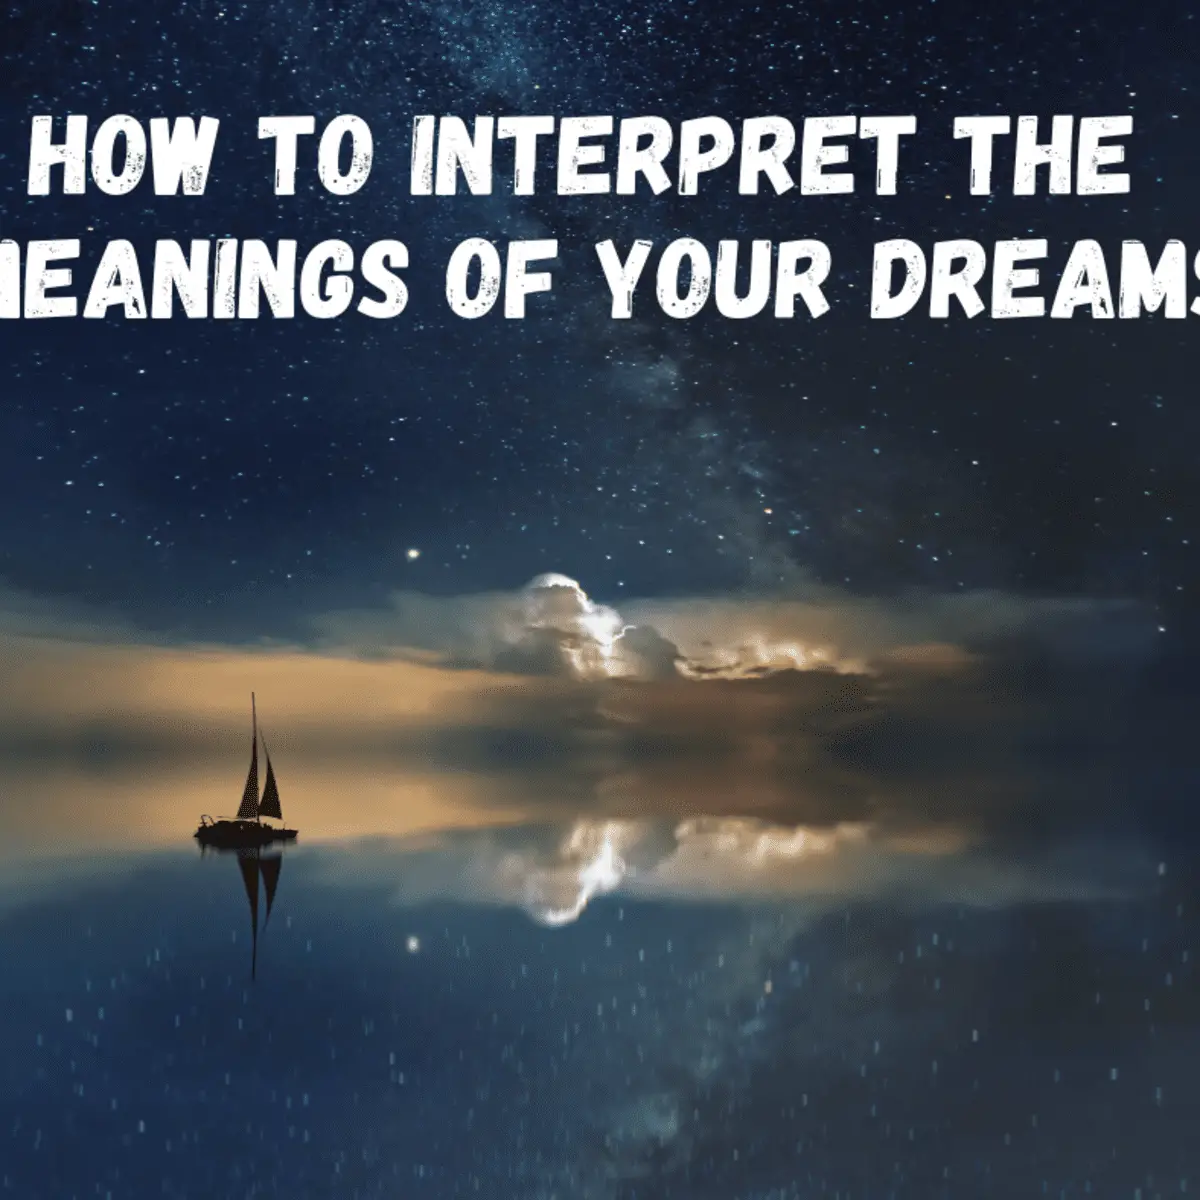 How Can Dreams Help Us Understand Ourselves?